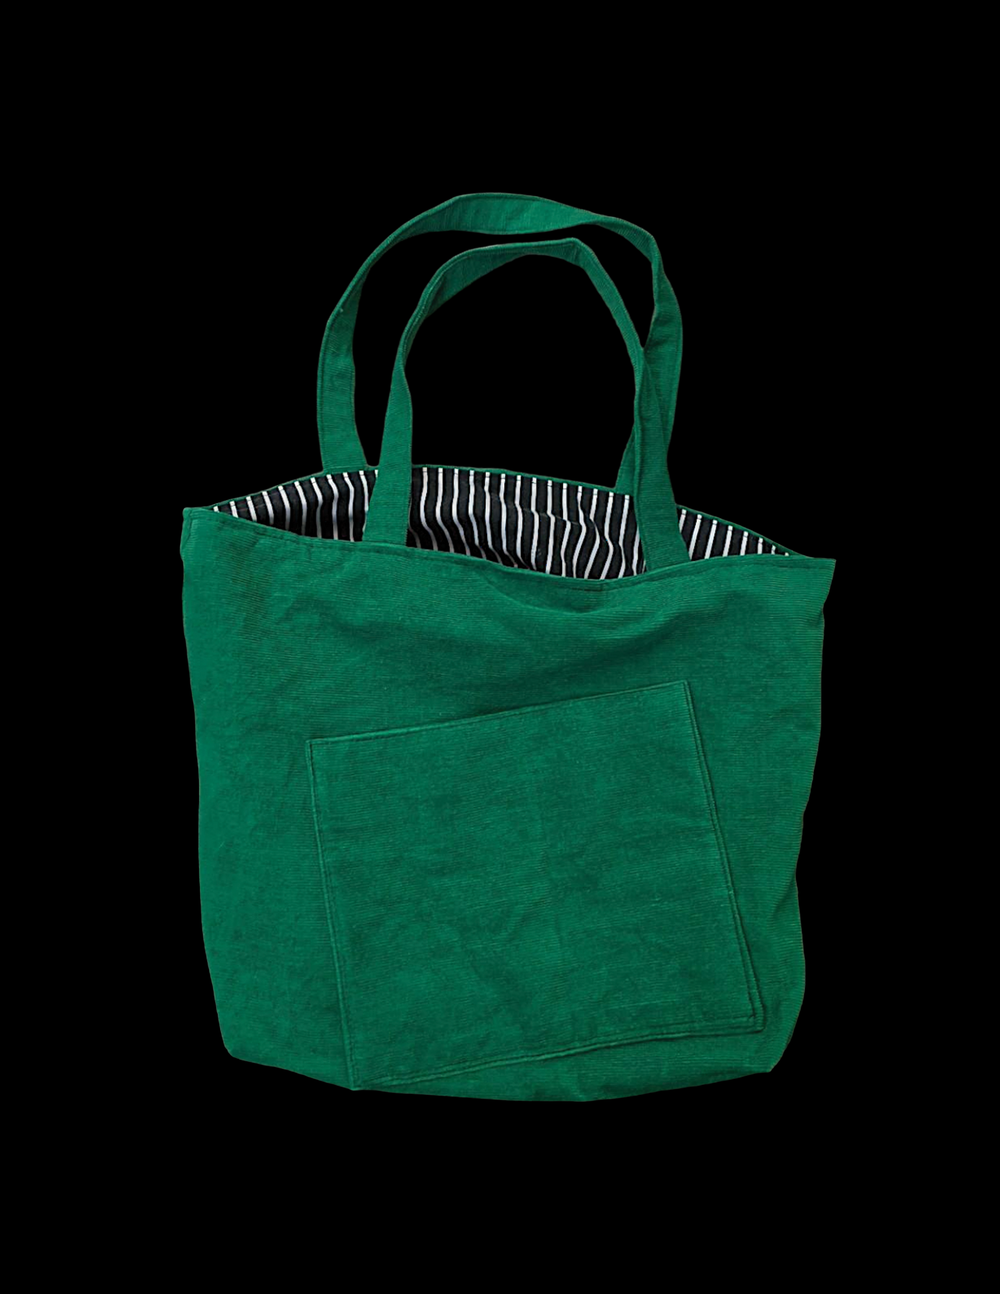 A green tote bag on a black background.